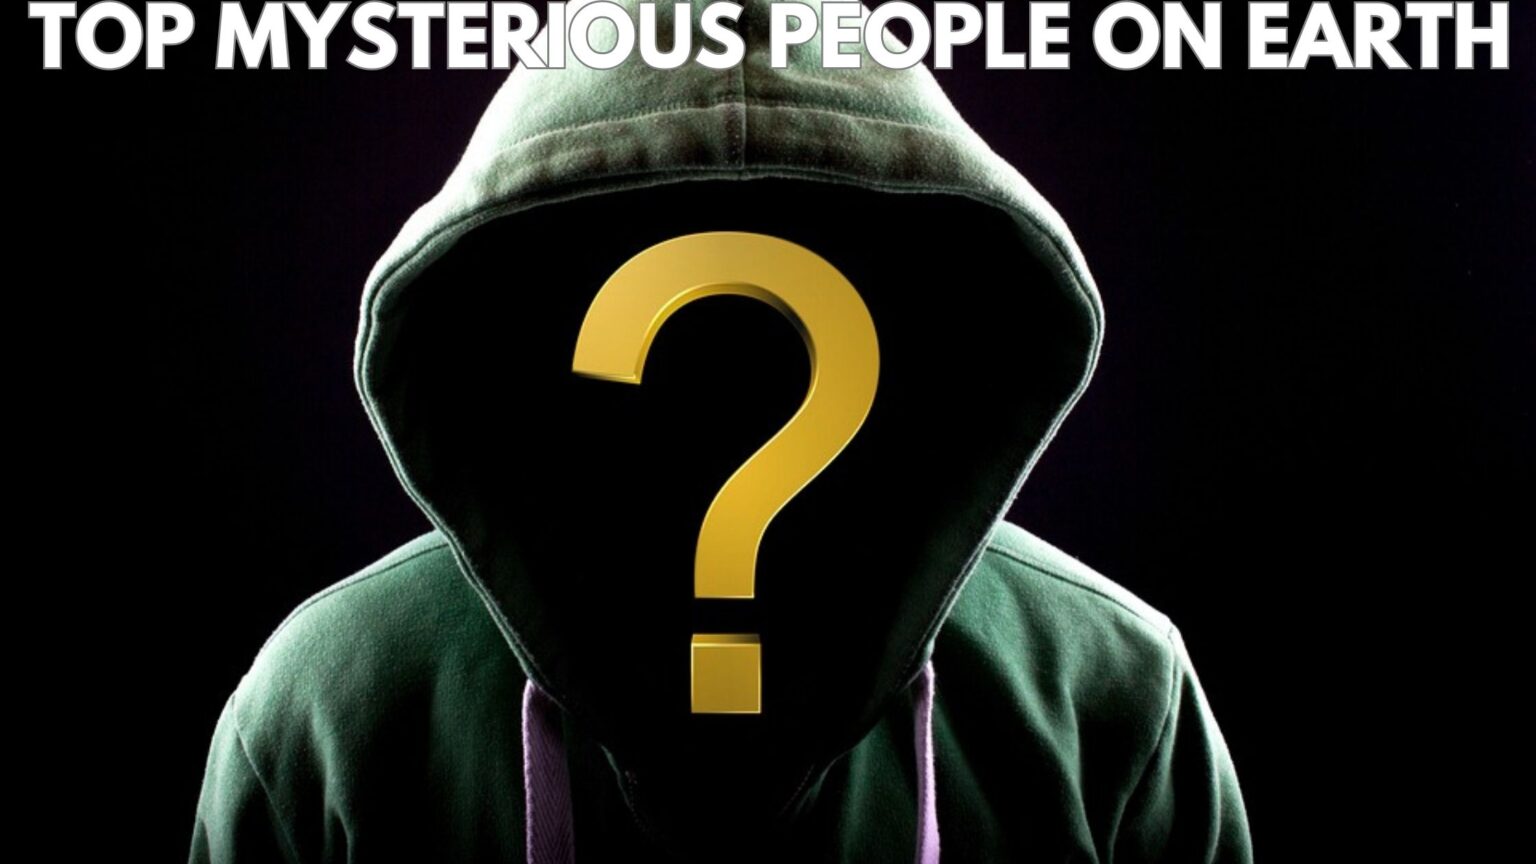 Get to know Top Mysterious People on Earth